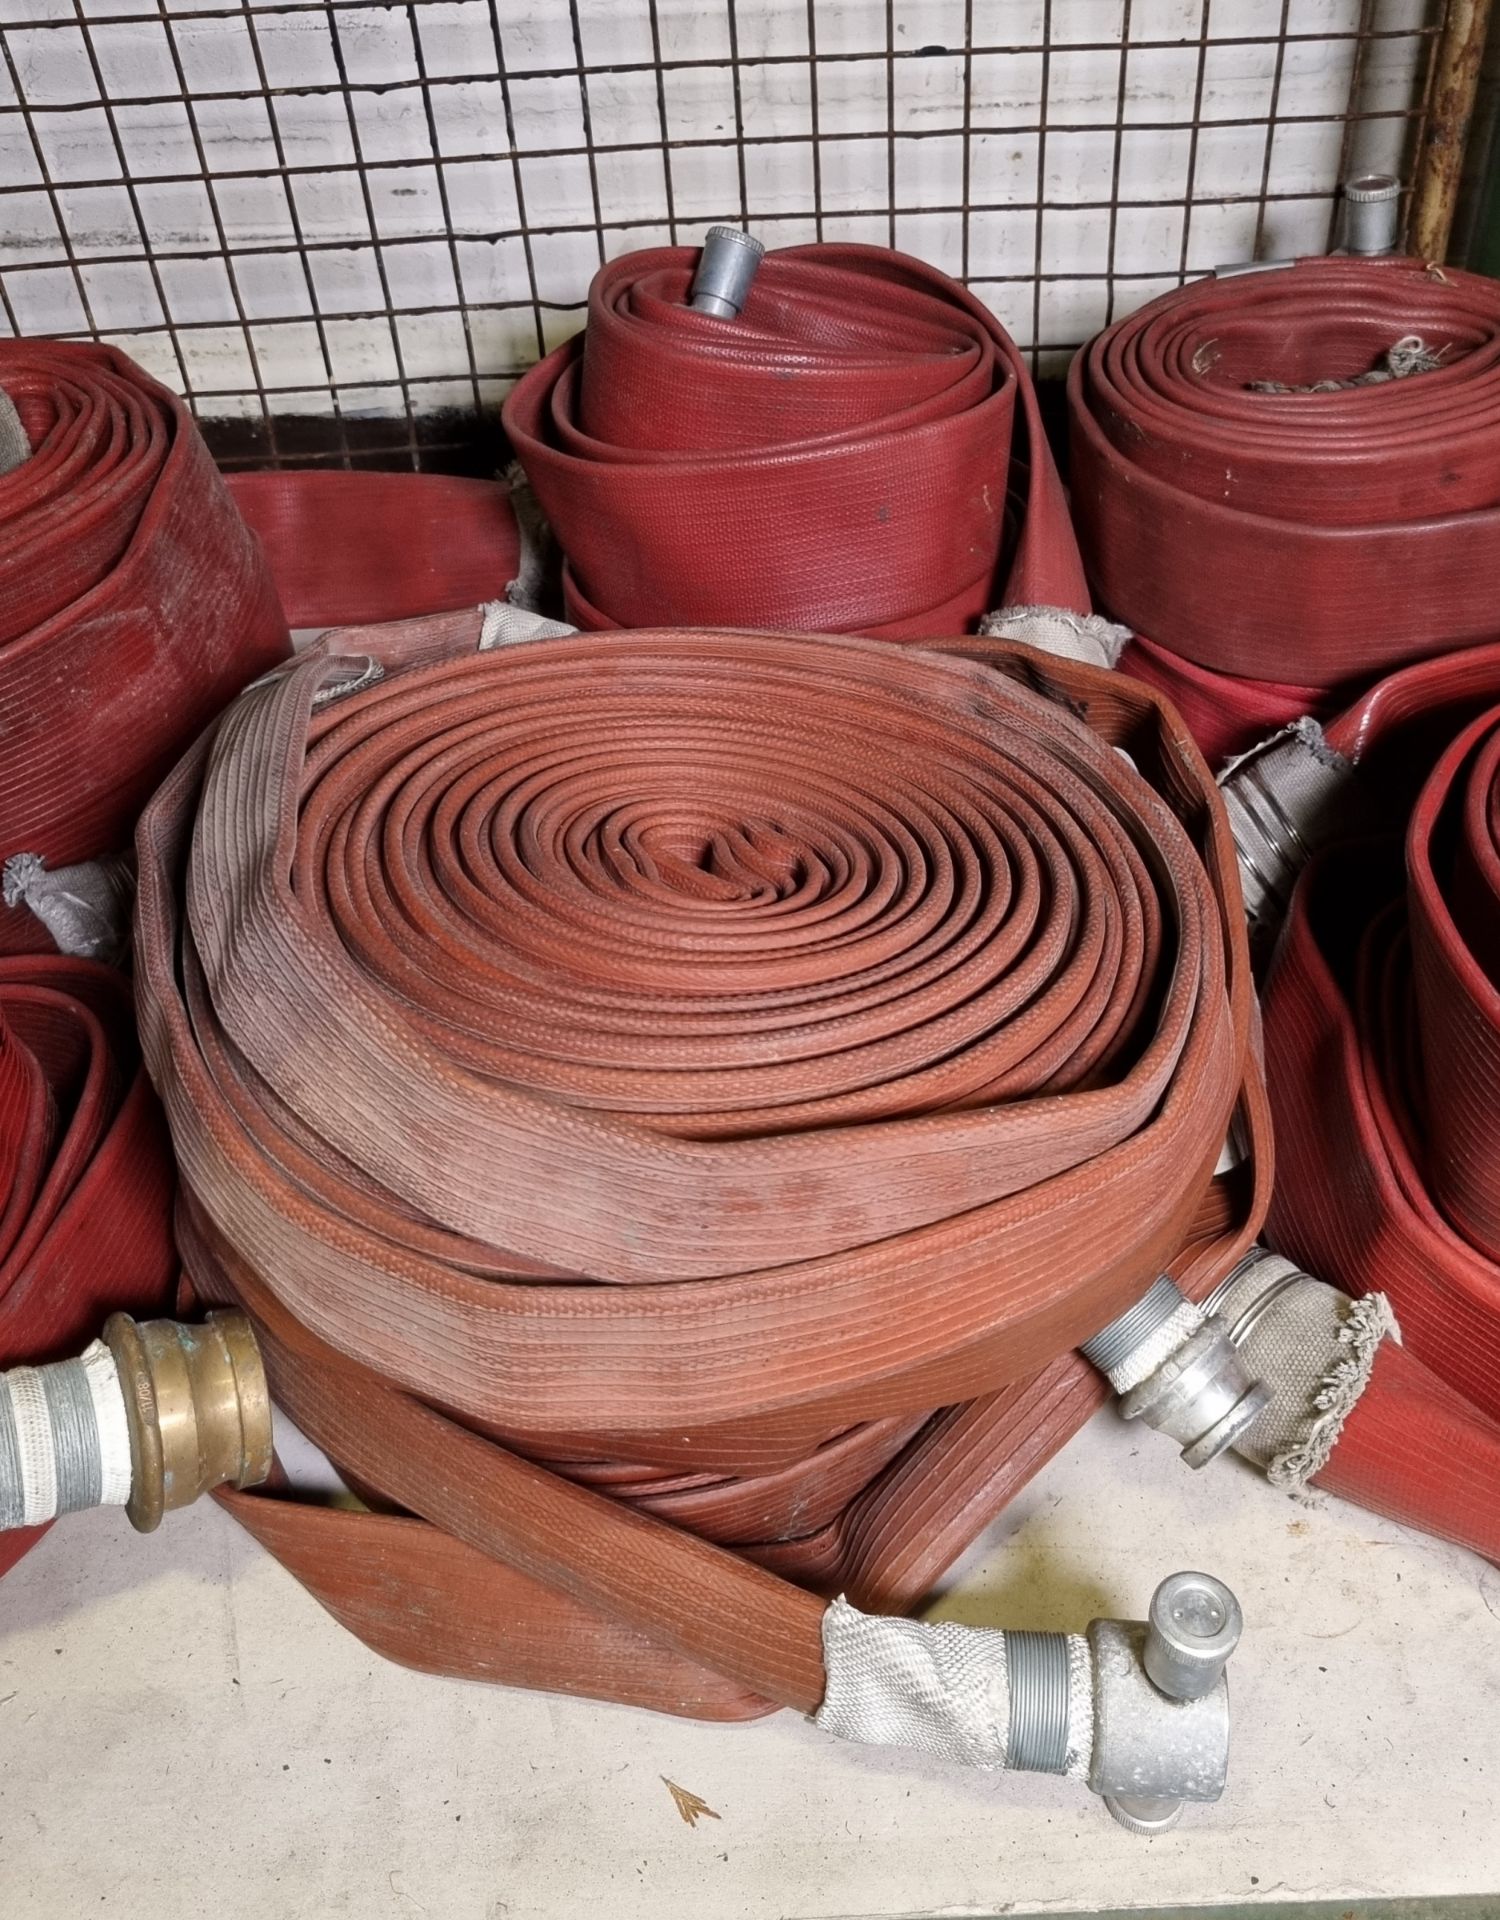 13x layflat hoses with couplings - assorted lengths - range approximately 2-20m - Image 4 of 7